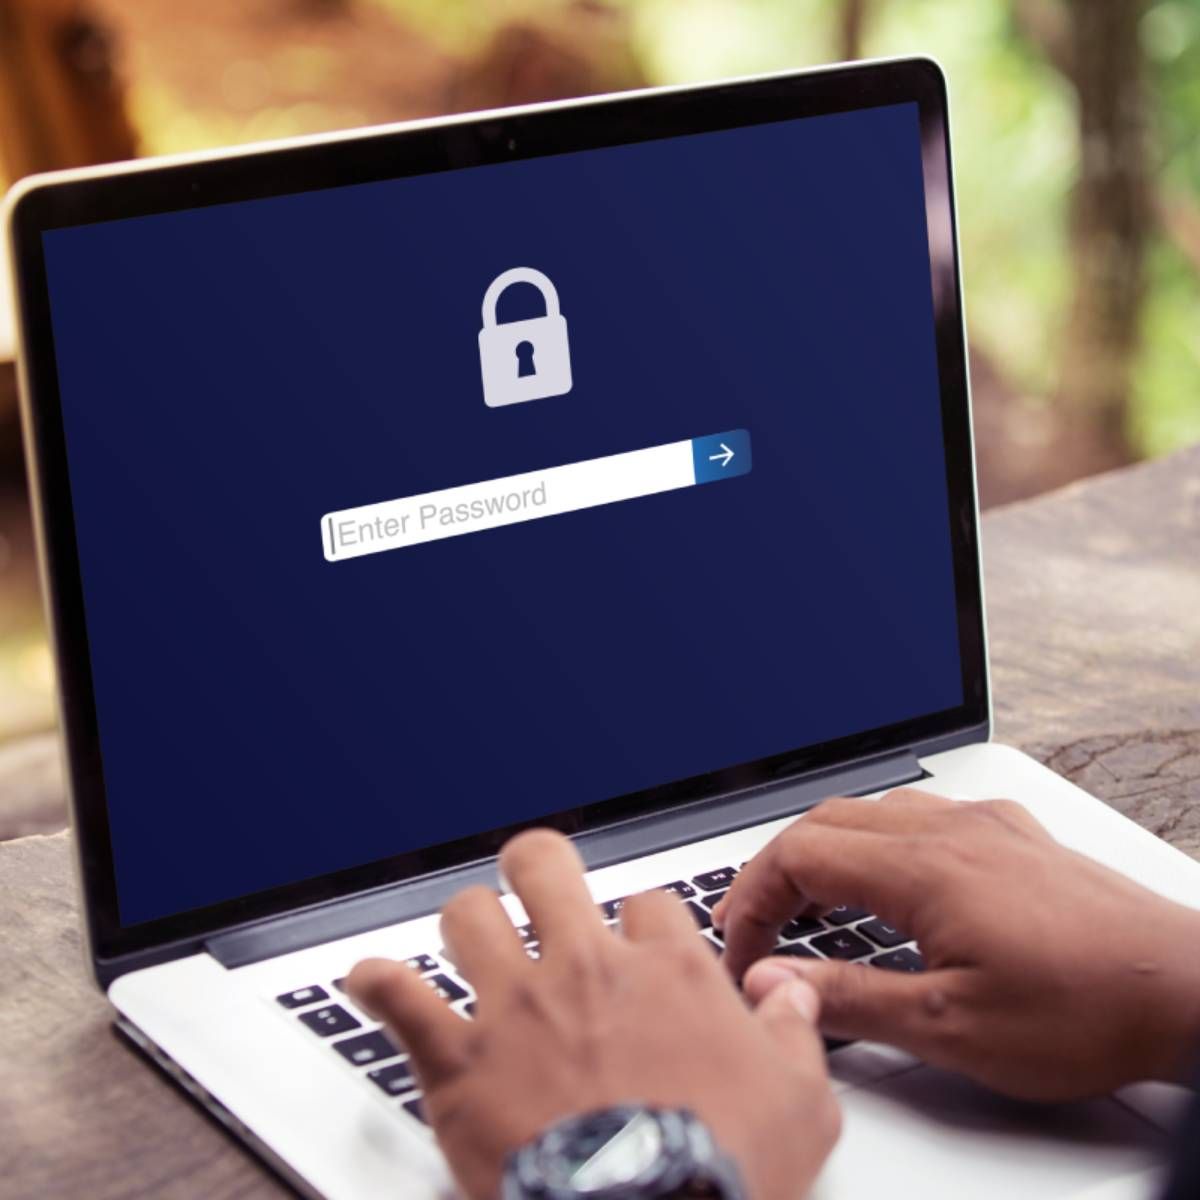 A user logging in to a password protected laptop.